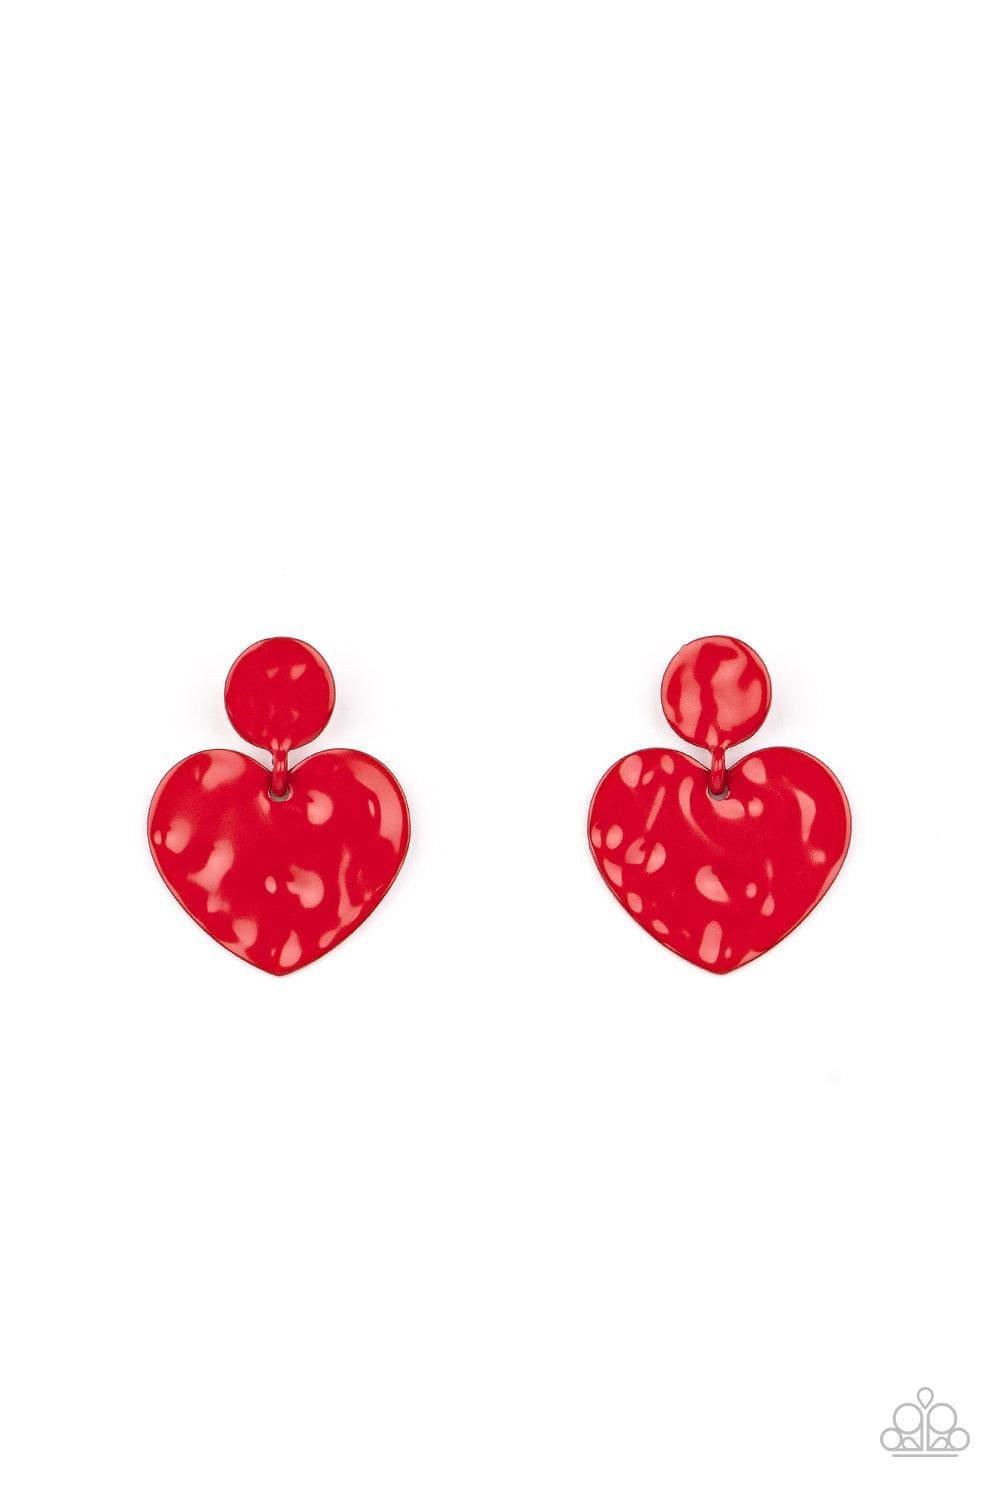 Paparazzi Accessories - Just a Little Crush - Red Earrings - Bling by JessieK